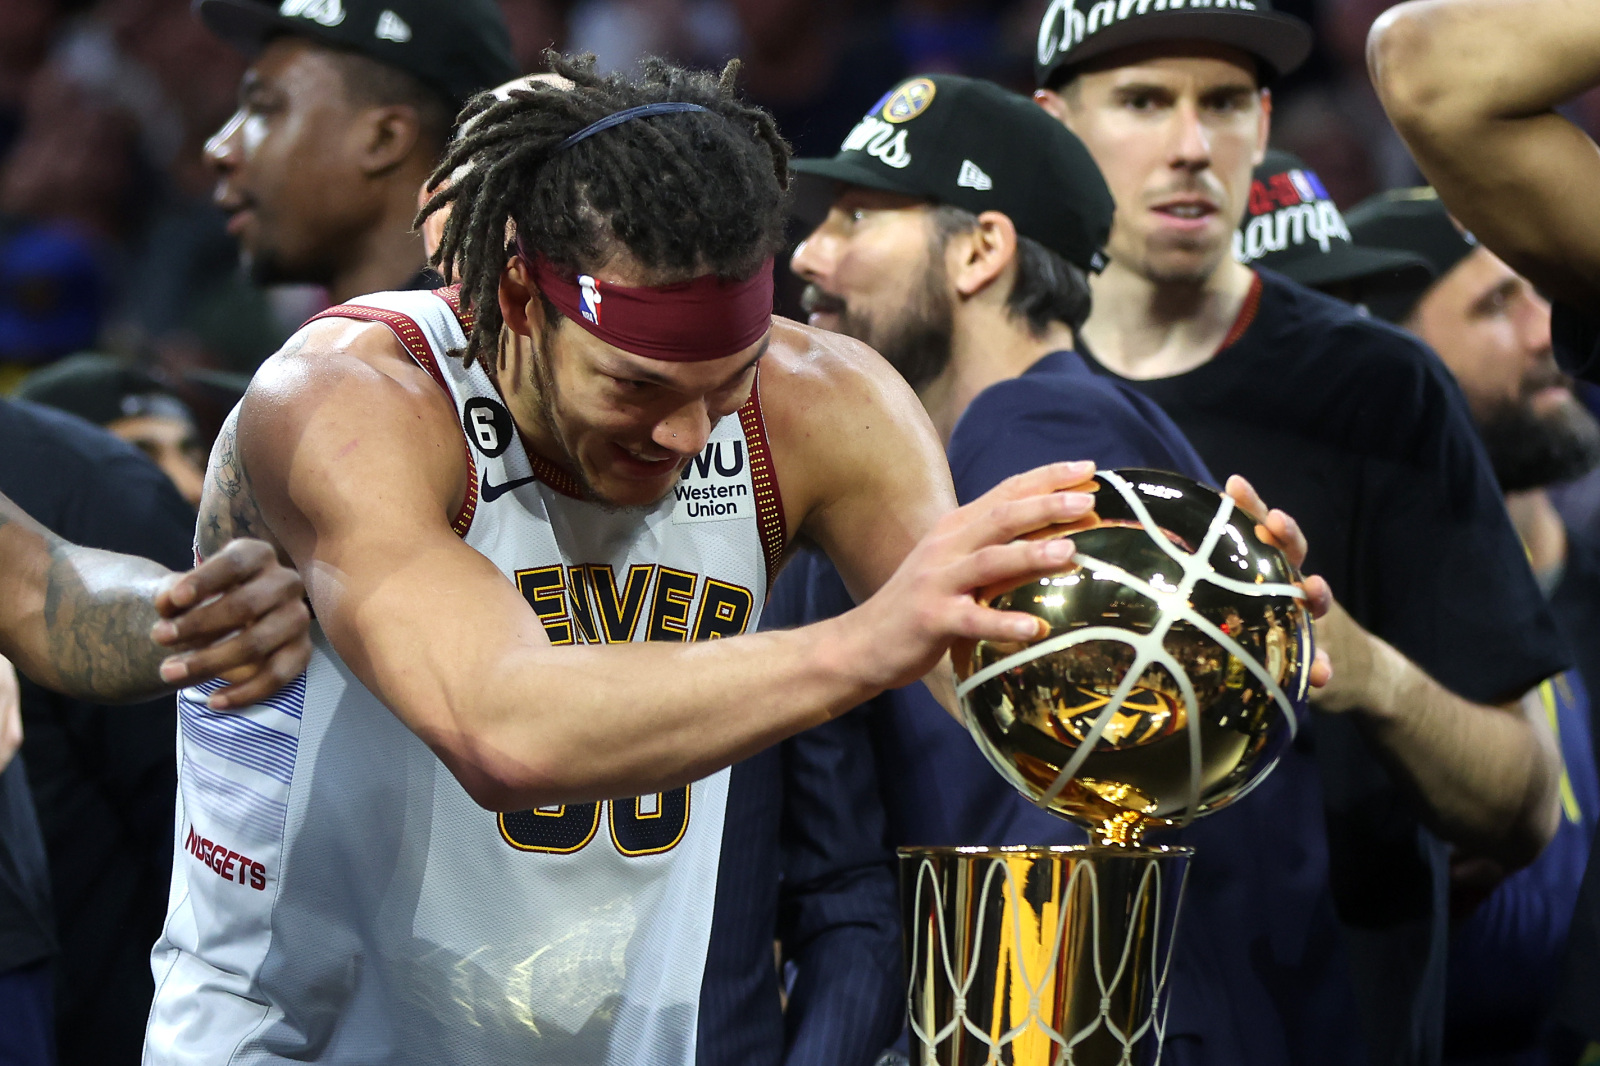 NBA Champions 2023: Here's how to get Denver Nuggets championship shirts,  hats, jerseys 